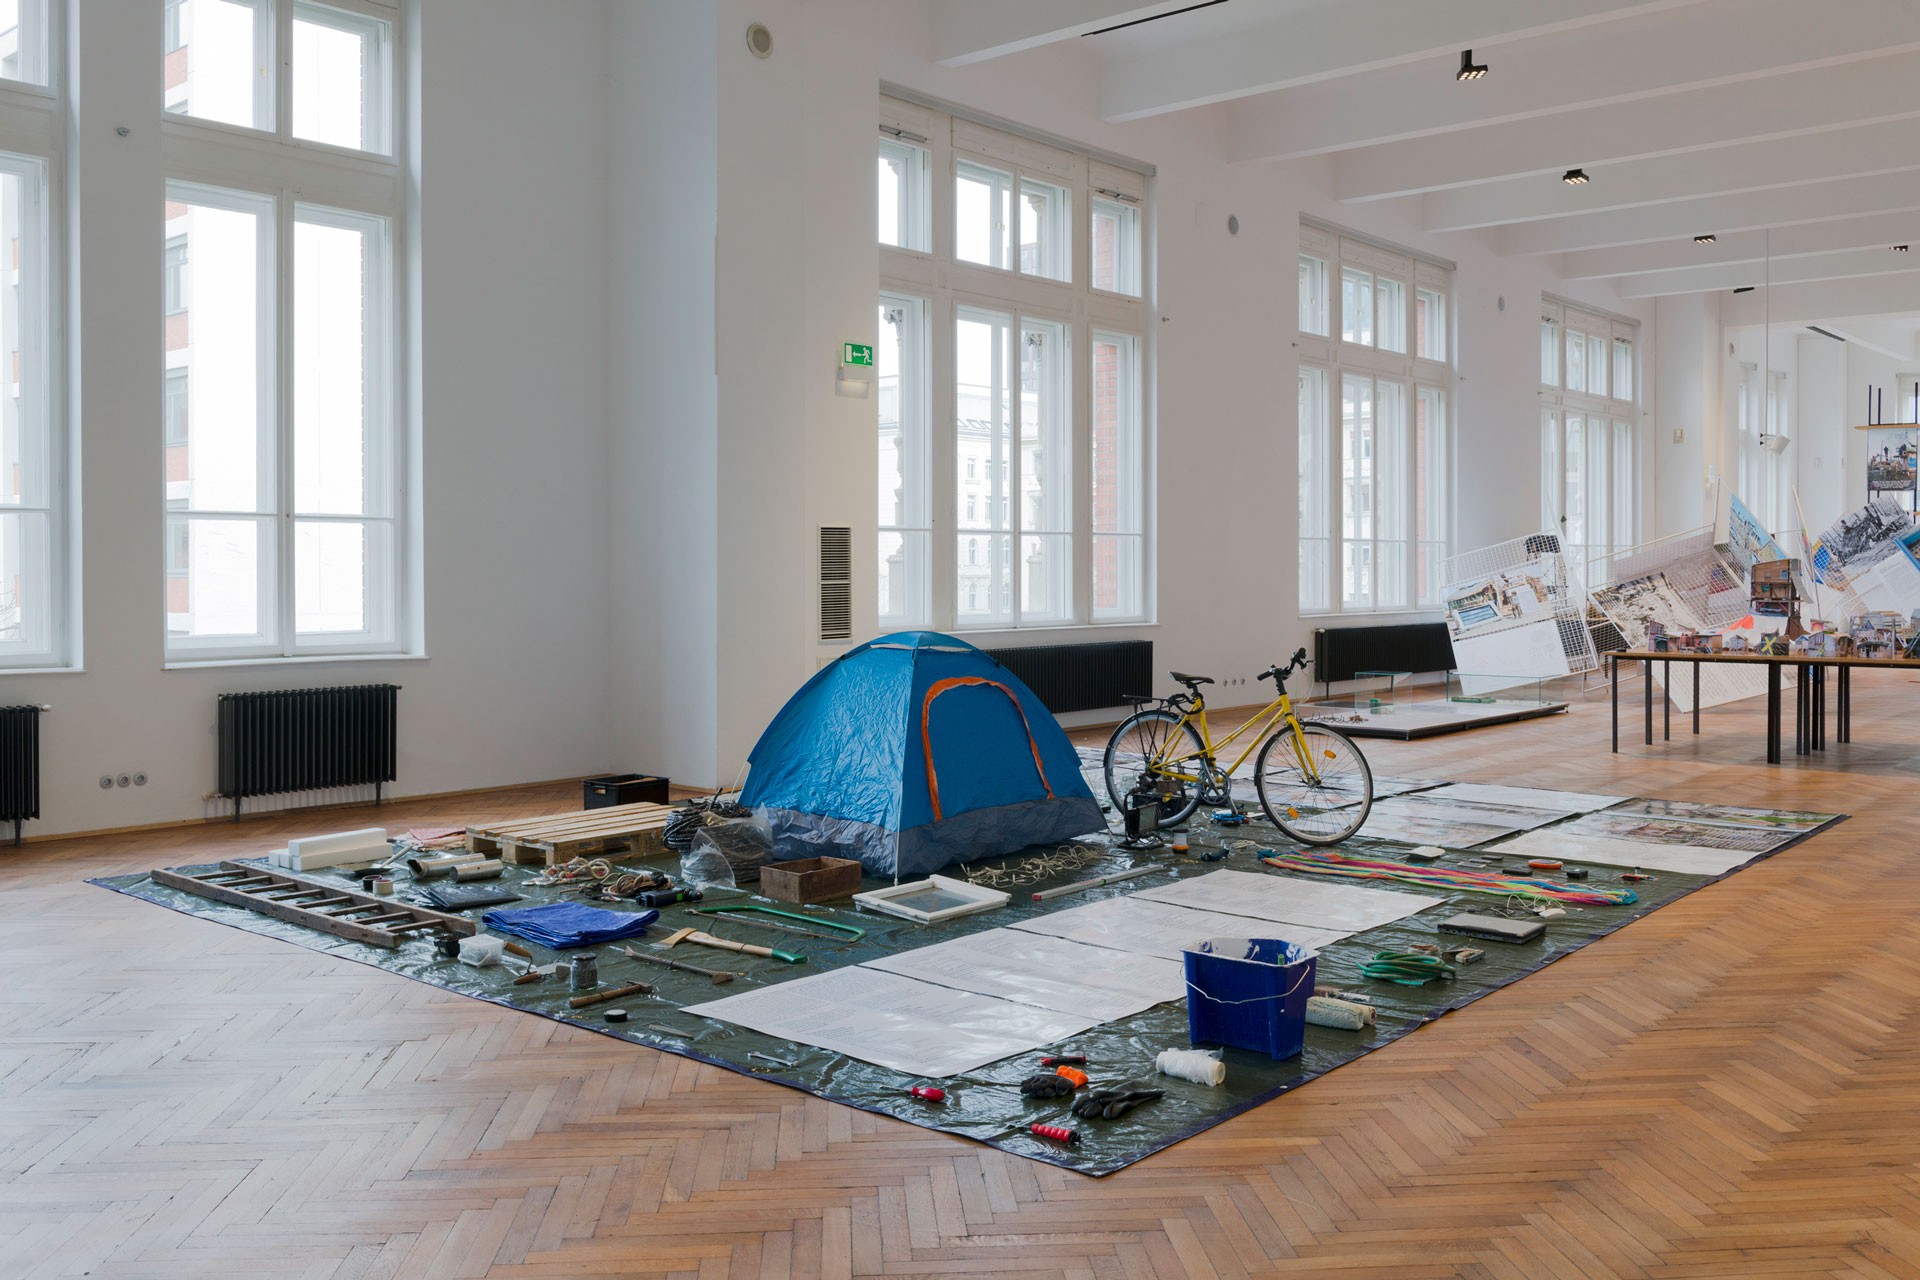 Exhibition room with objects from a protest camp